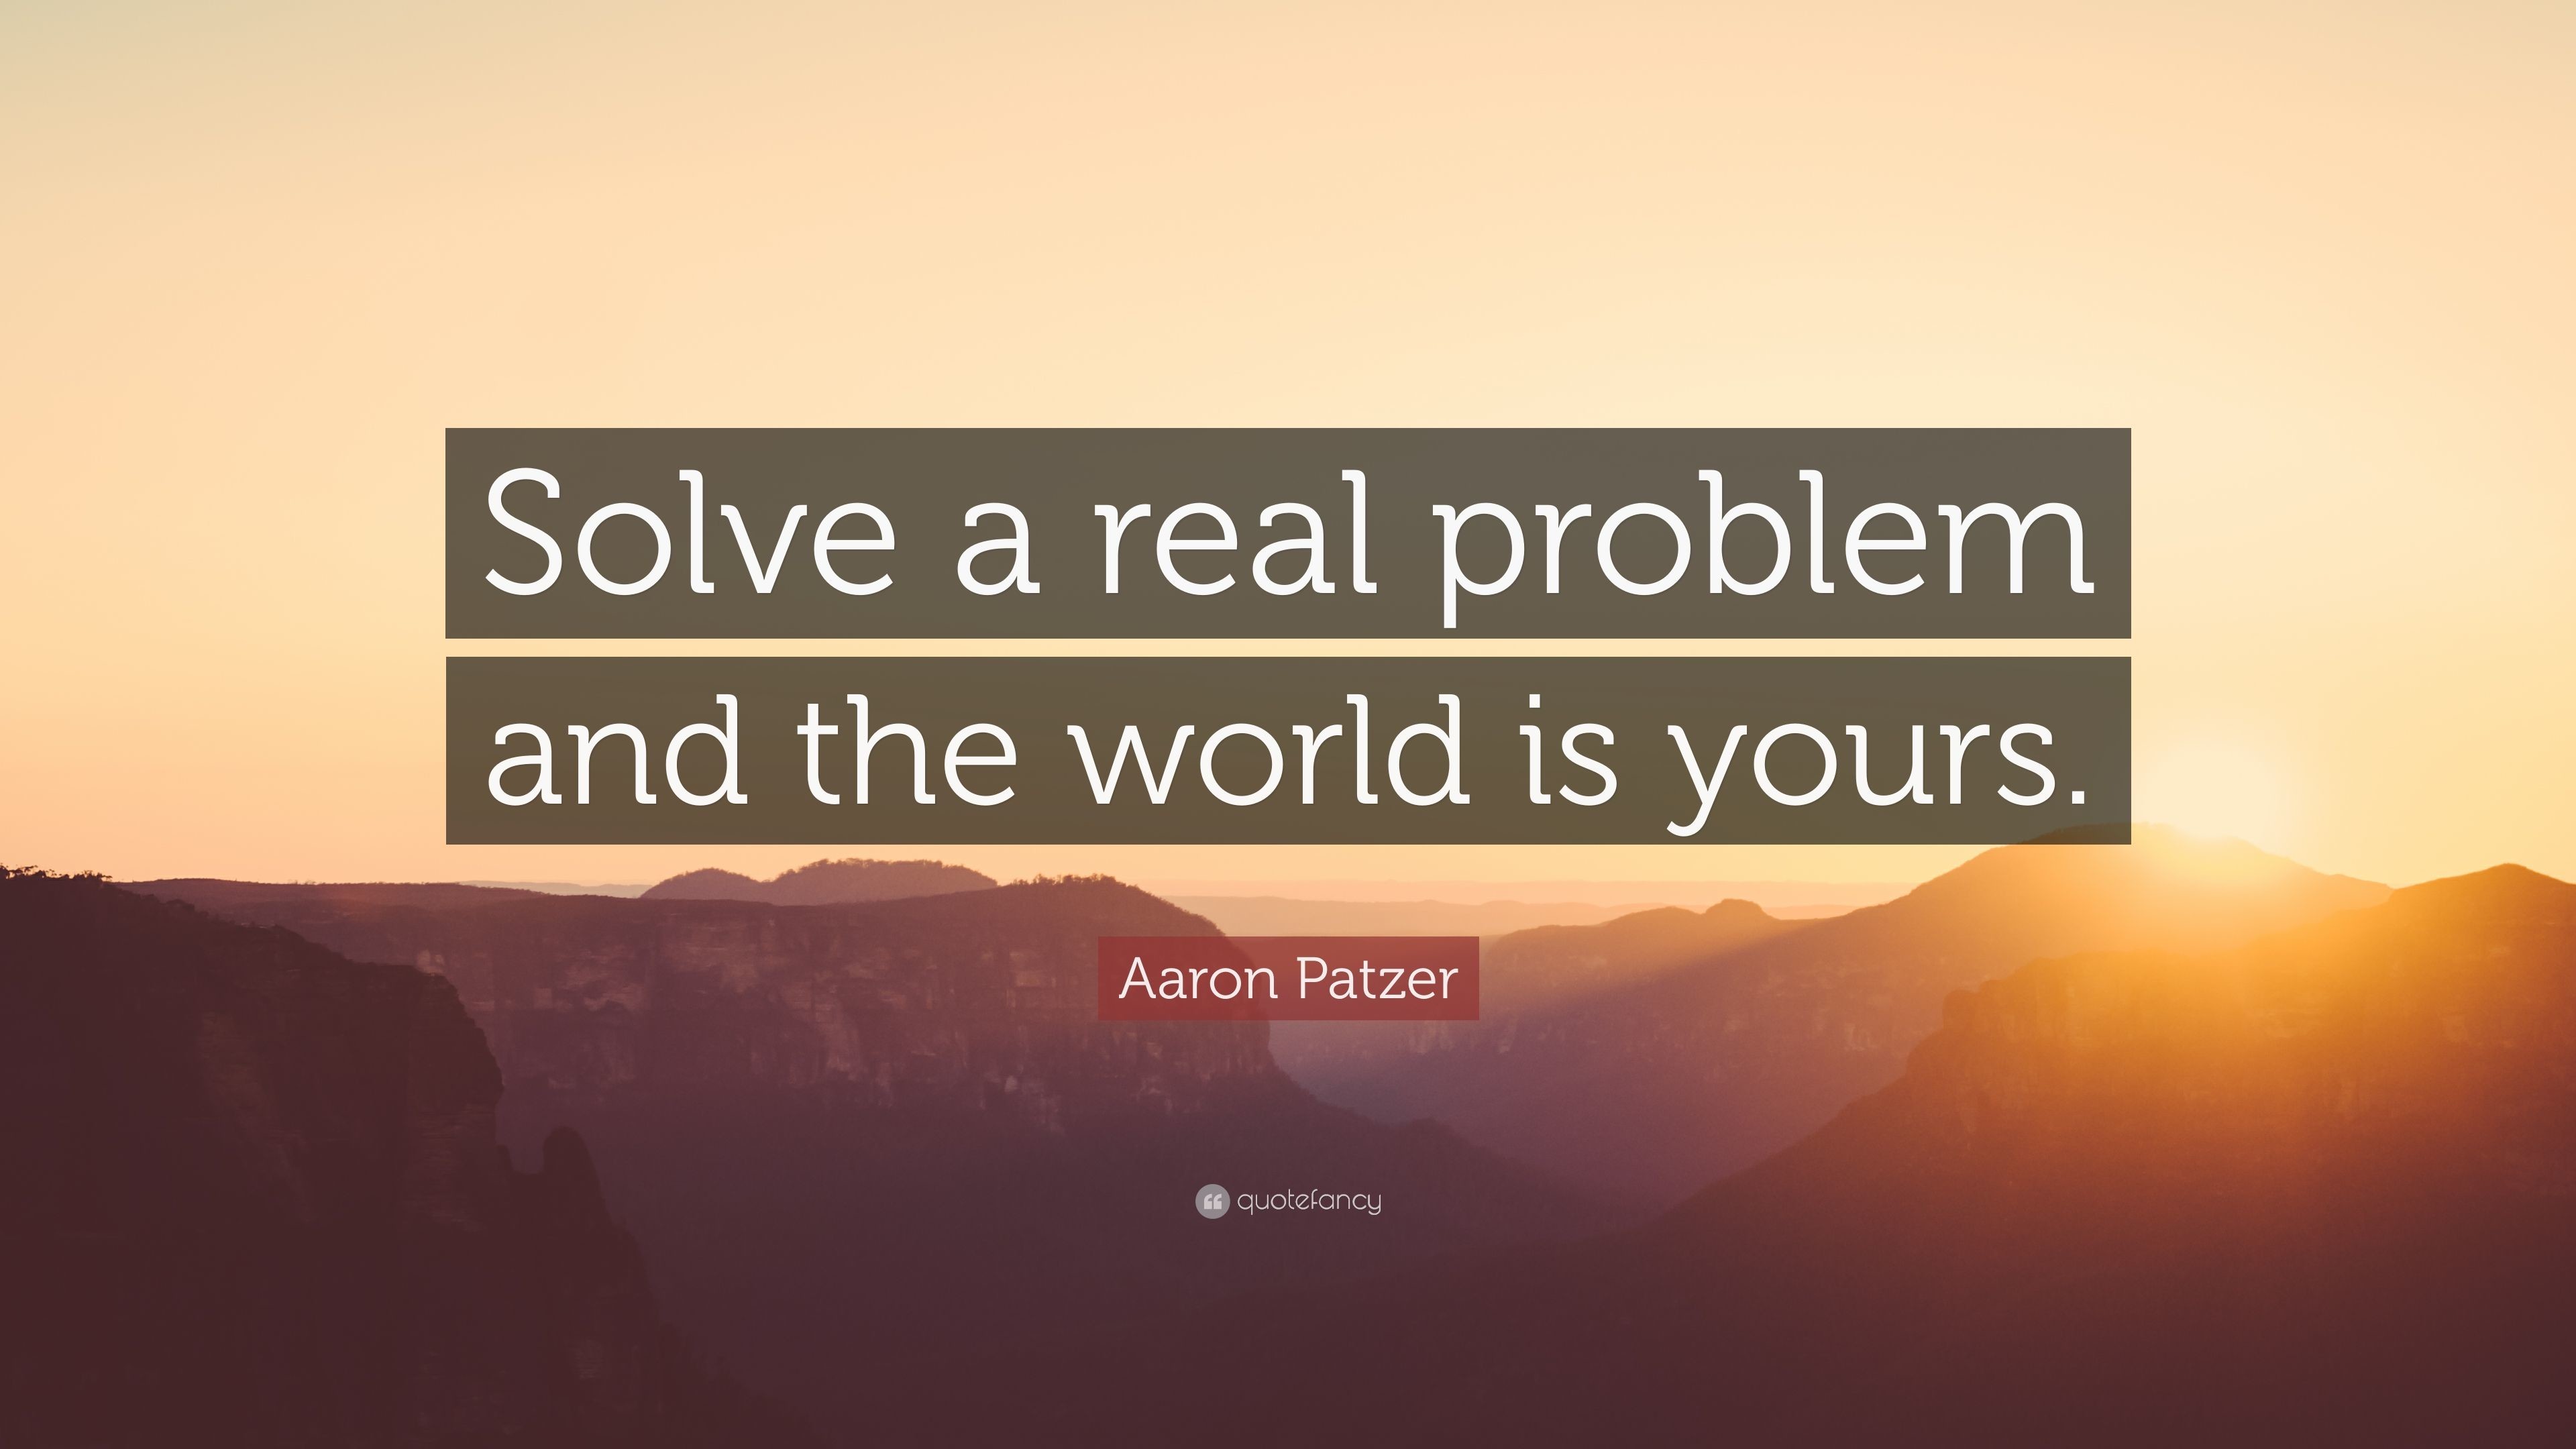 3840x2160 Aaron Patzer Quote: “Solve a real problem and the world is yours.”